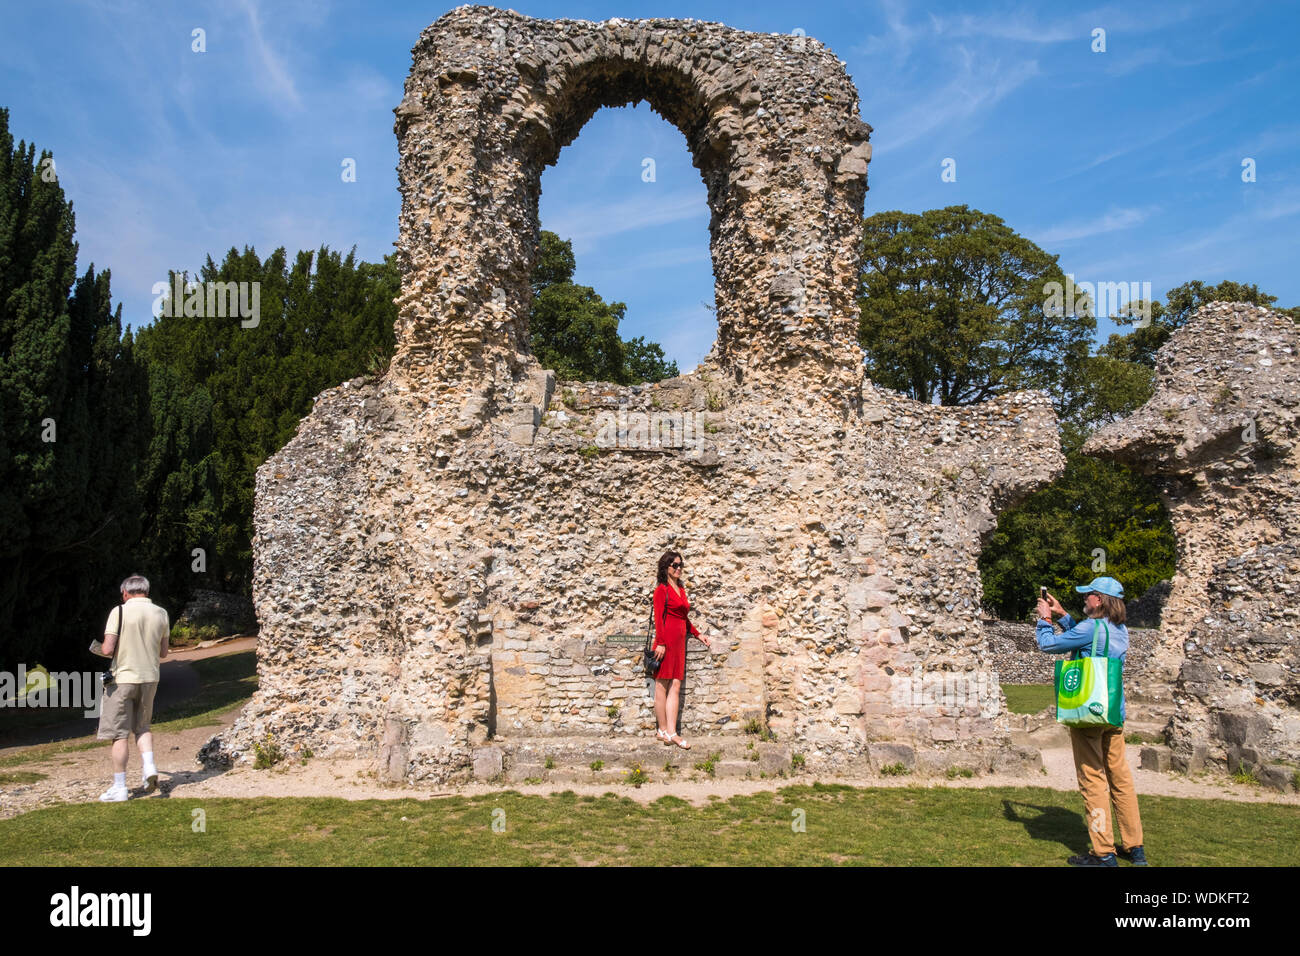 Tourists taking photographs at  Bury St Edmunds abbey ruins and gardens, Suffolk, UK. Stock Photo